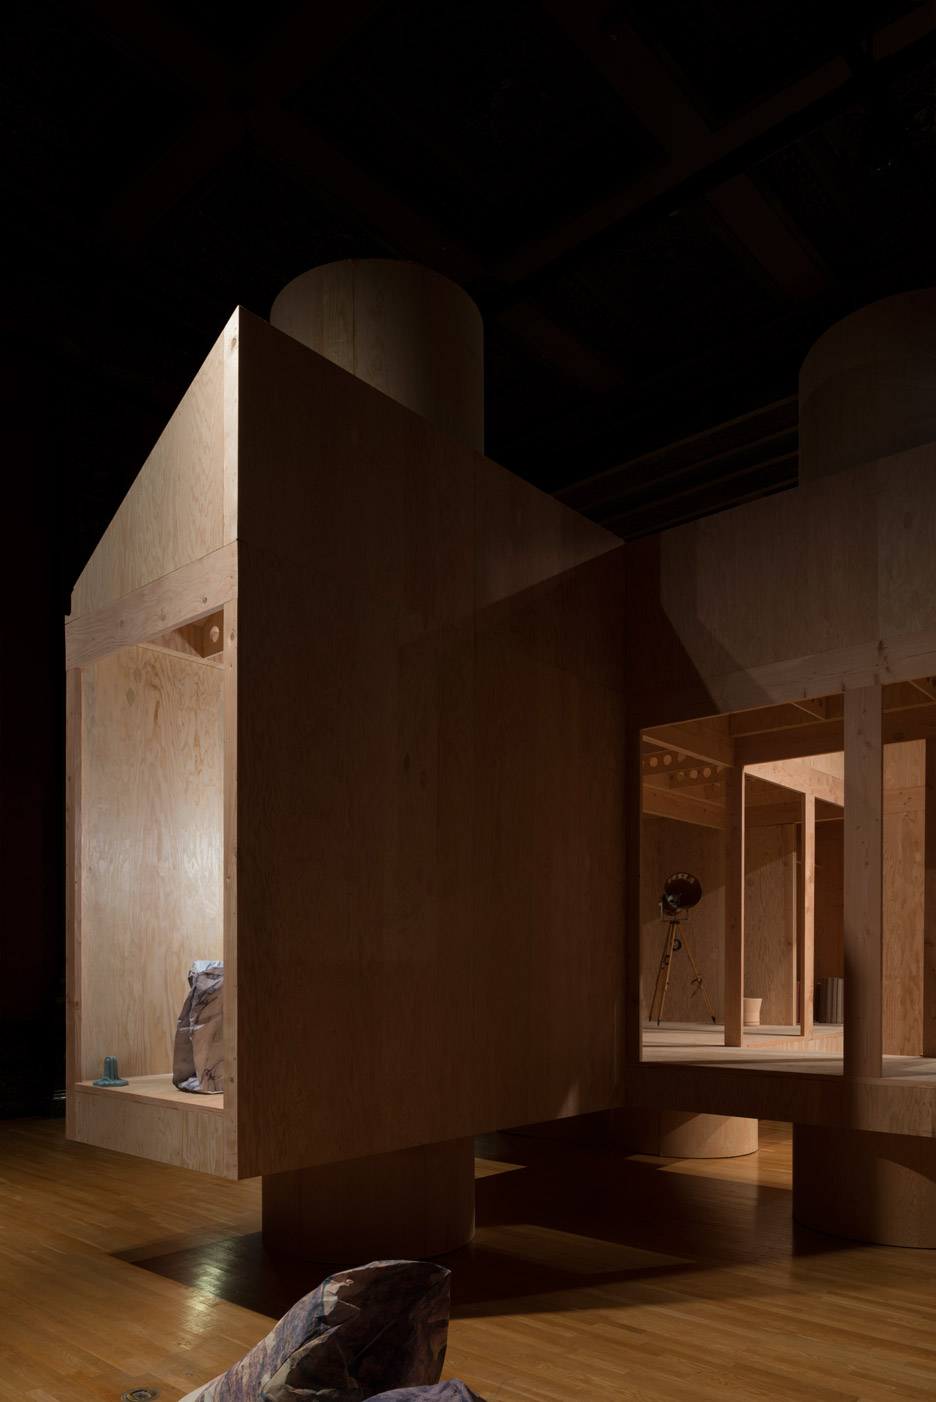 MOS Architects Corridor House at the 2015 Chicago Architecture Biennial